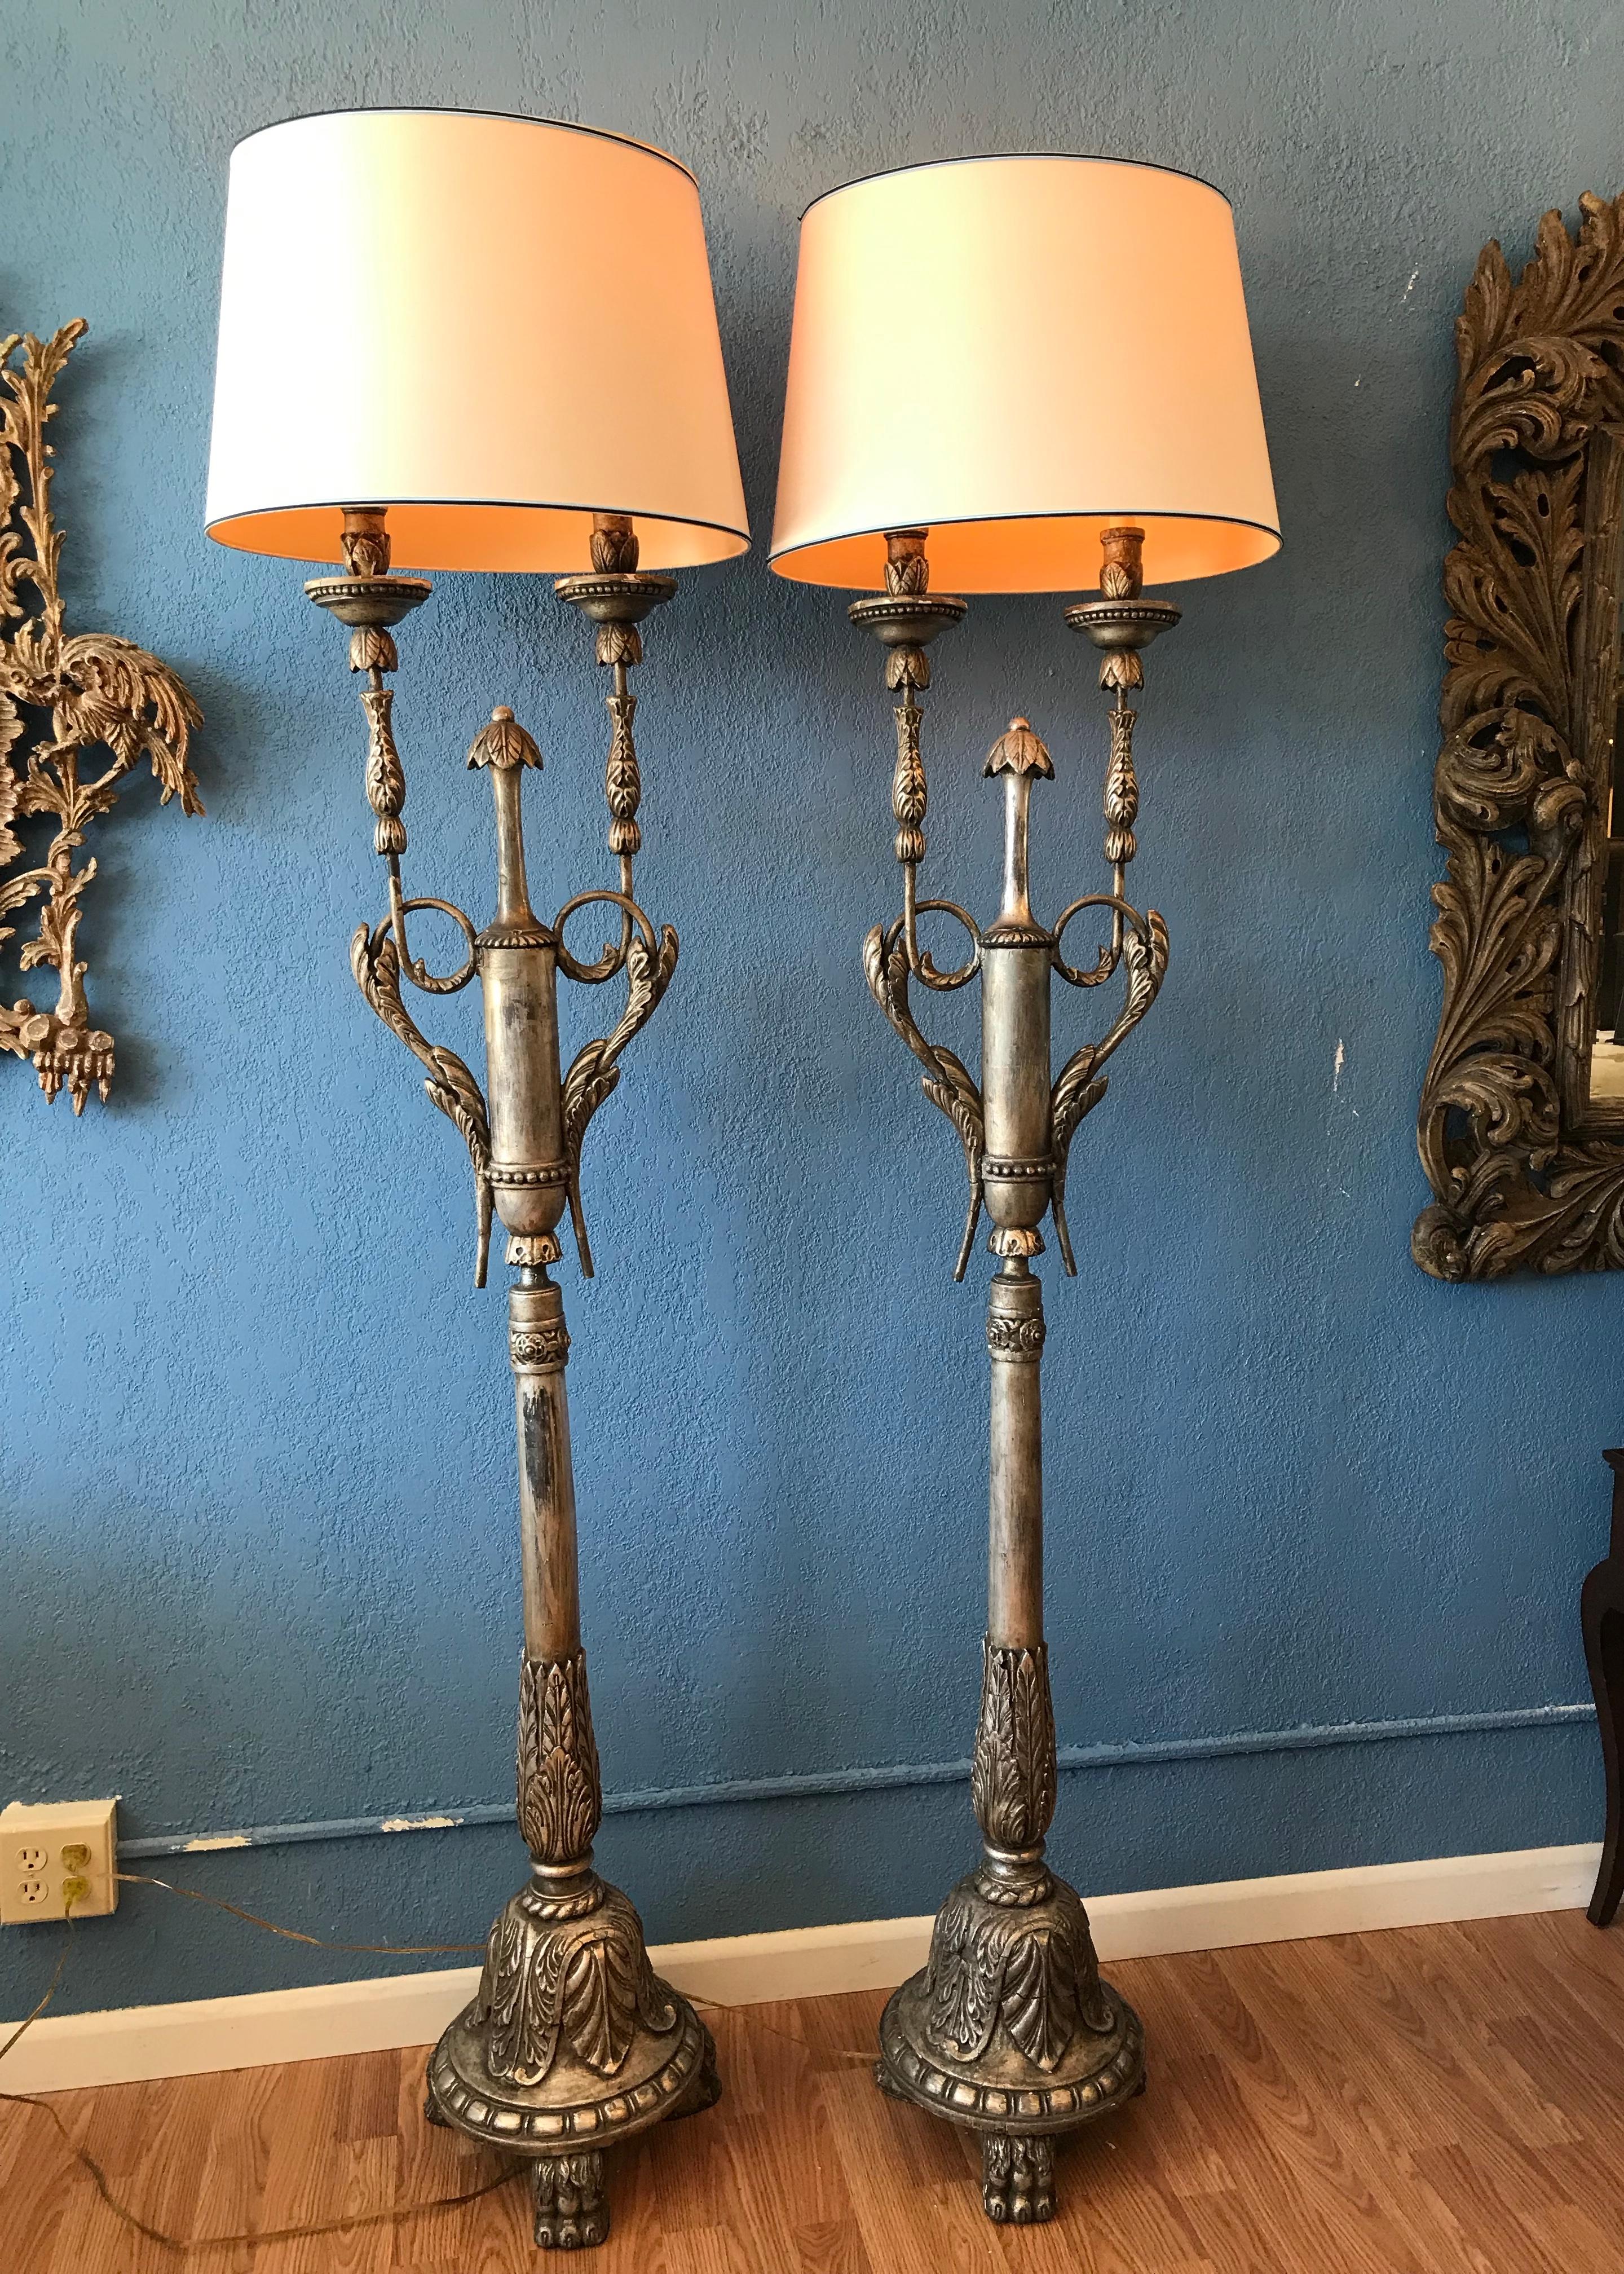 Pair of Silver-Leaf Carved Wood Torchieres / Floor Lamps For Sale 3